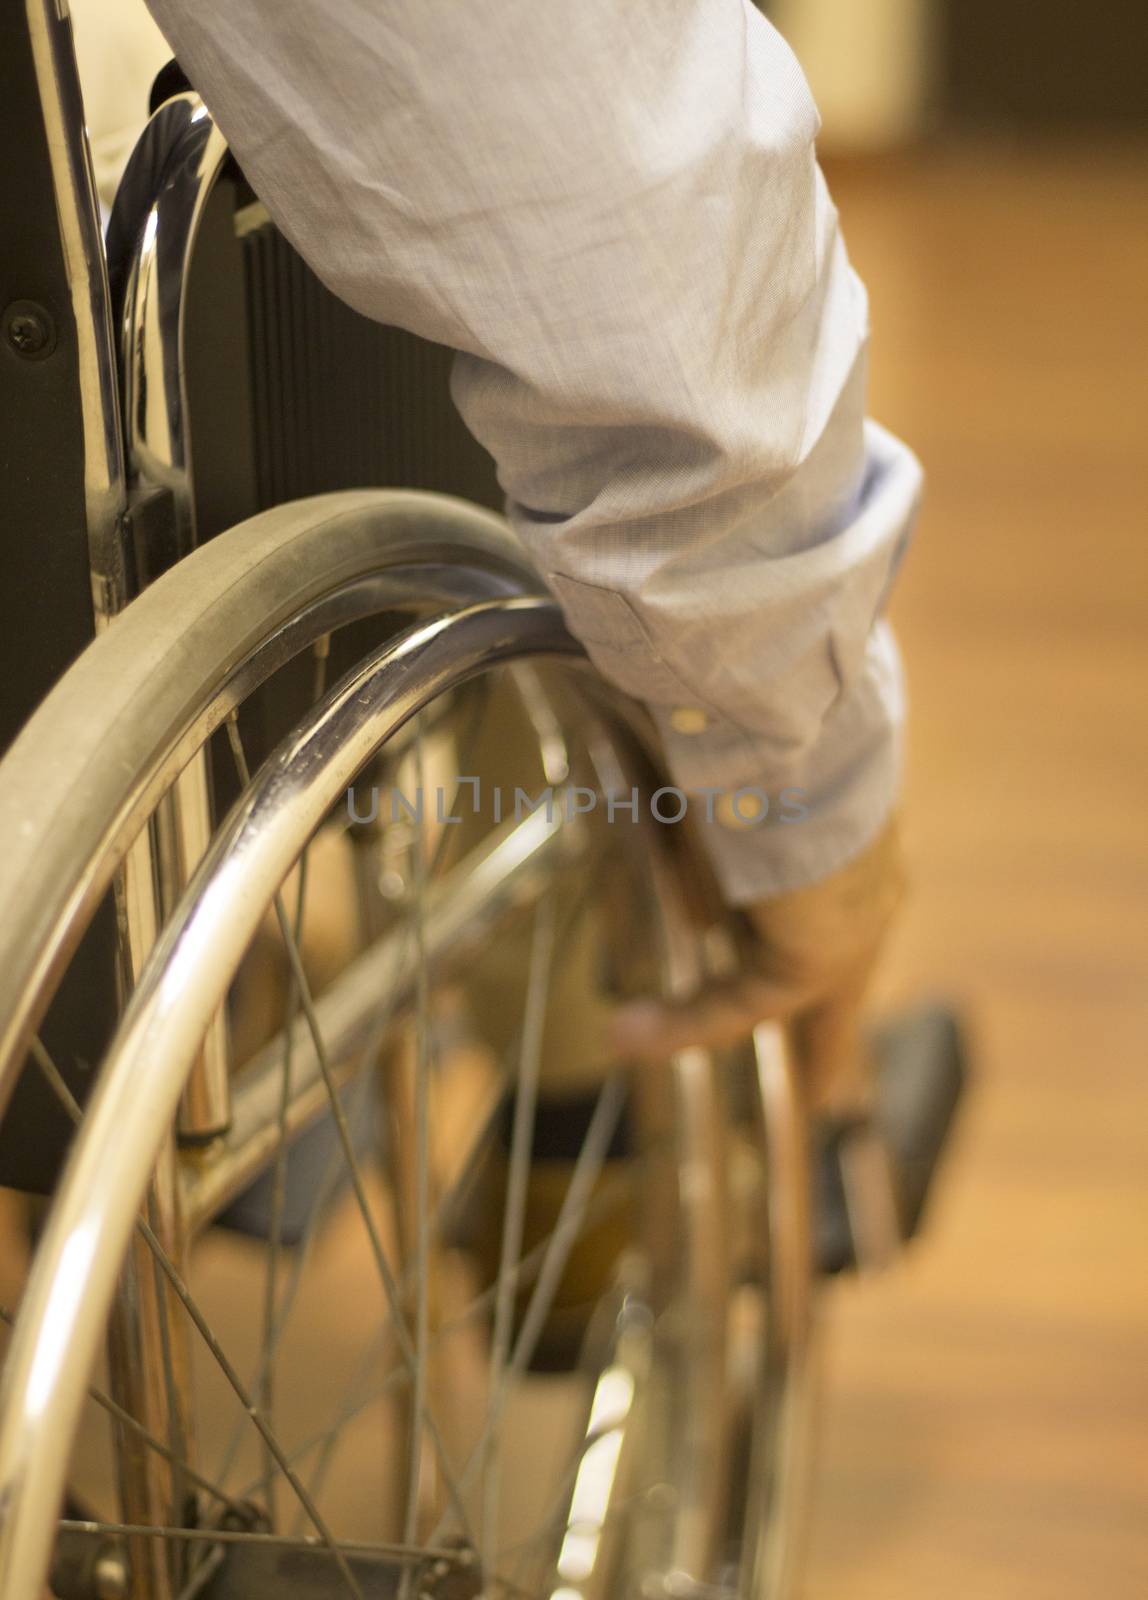 Man sitting in wheel chair wearing blue shirt pushing wheel to move himself forward in hospital clinic. Color digital photo in warm tones shot from behind with shallow depth of focus.